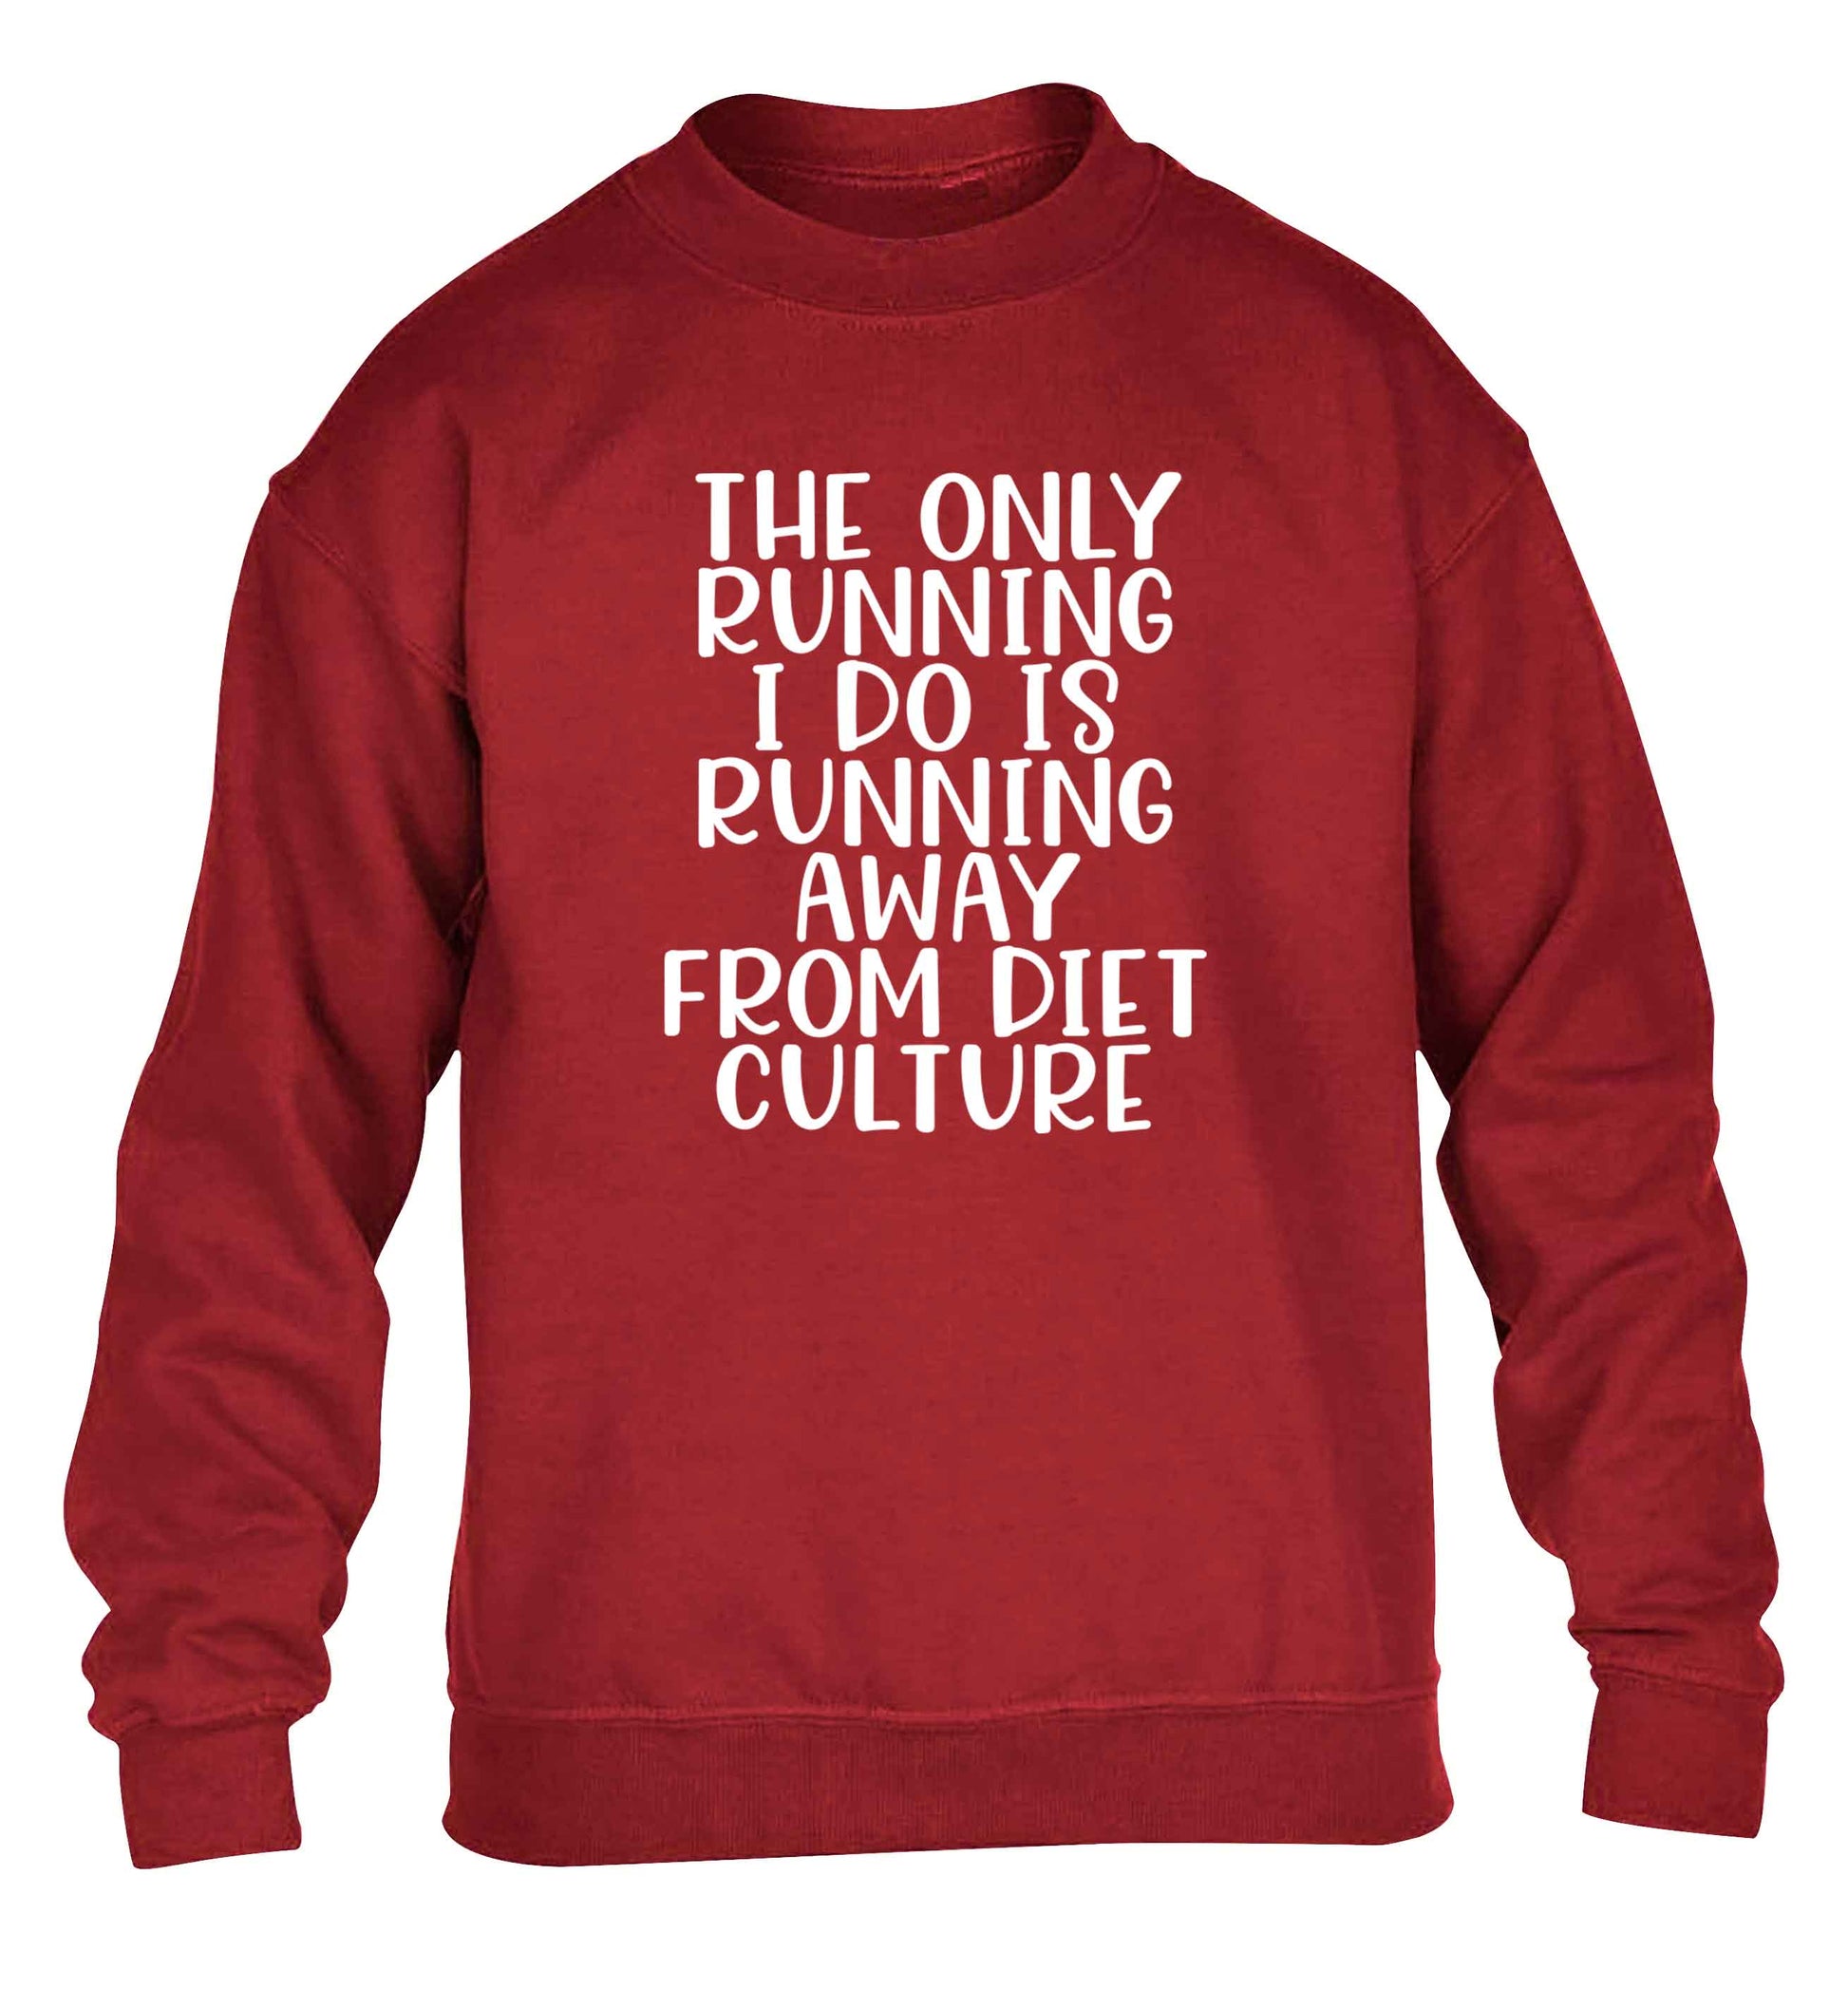 The only running I do is running away from diet culture children's grey sweater 12-13 Years